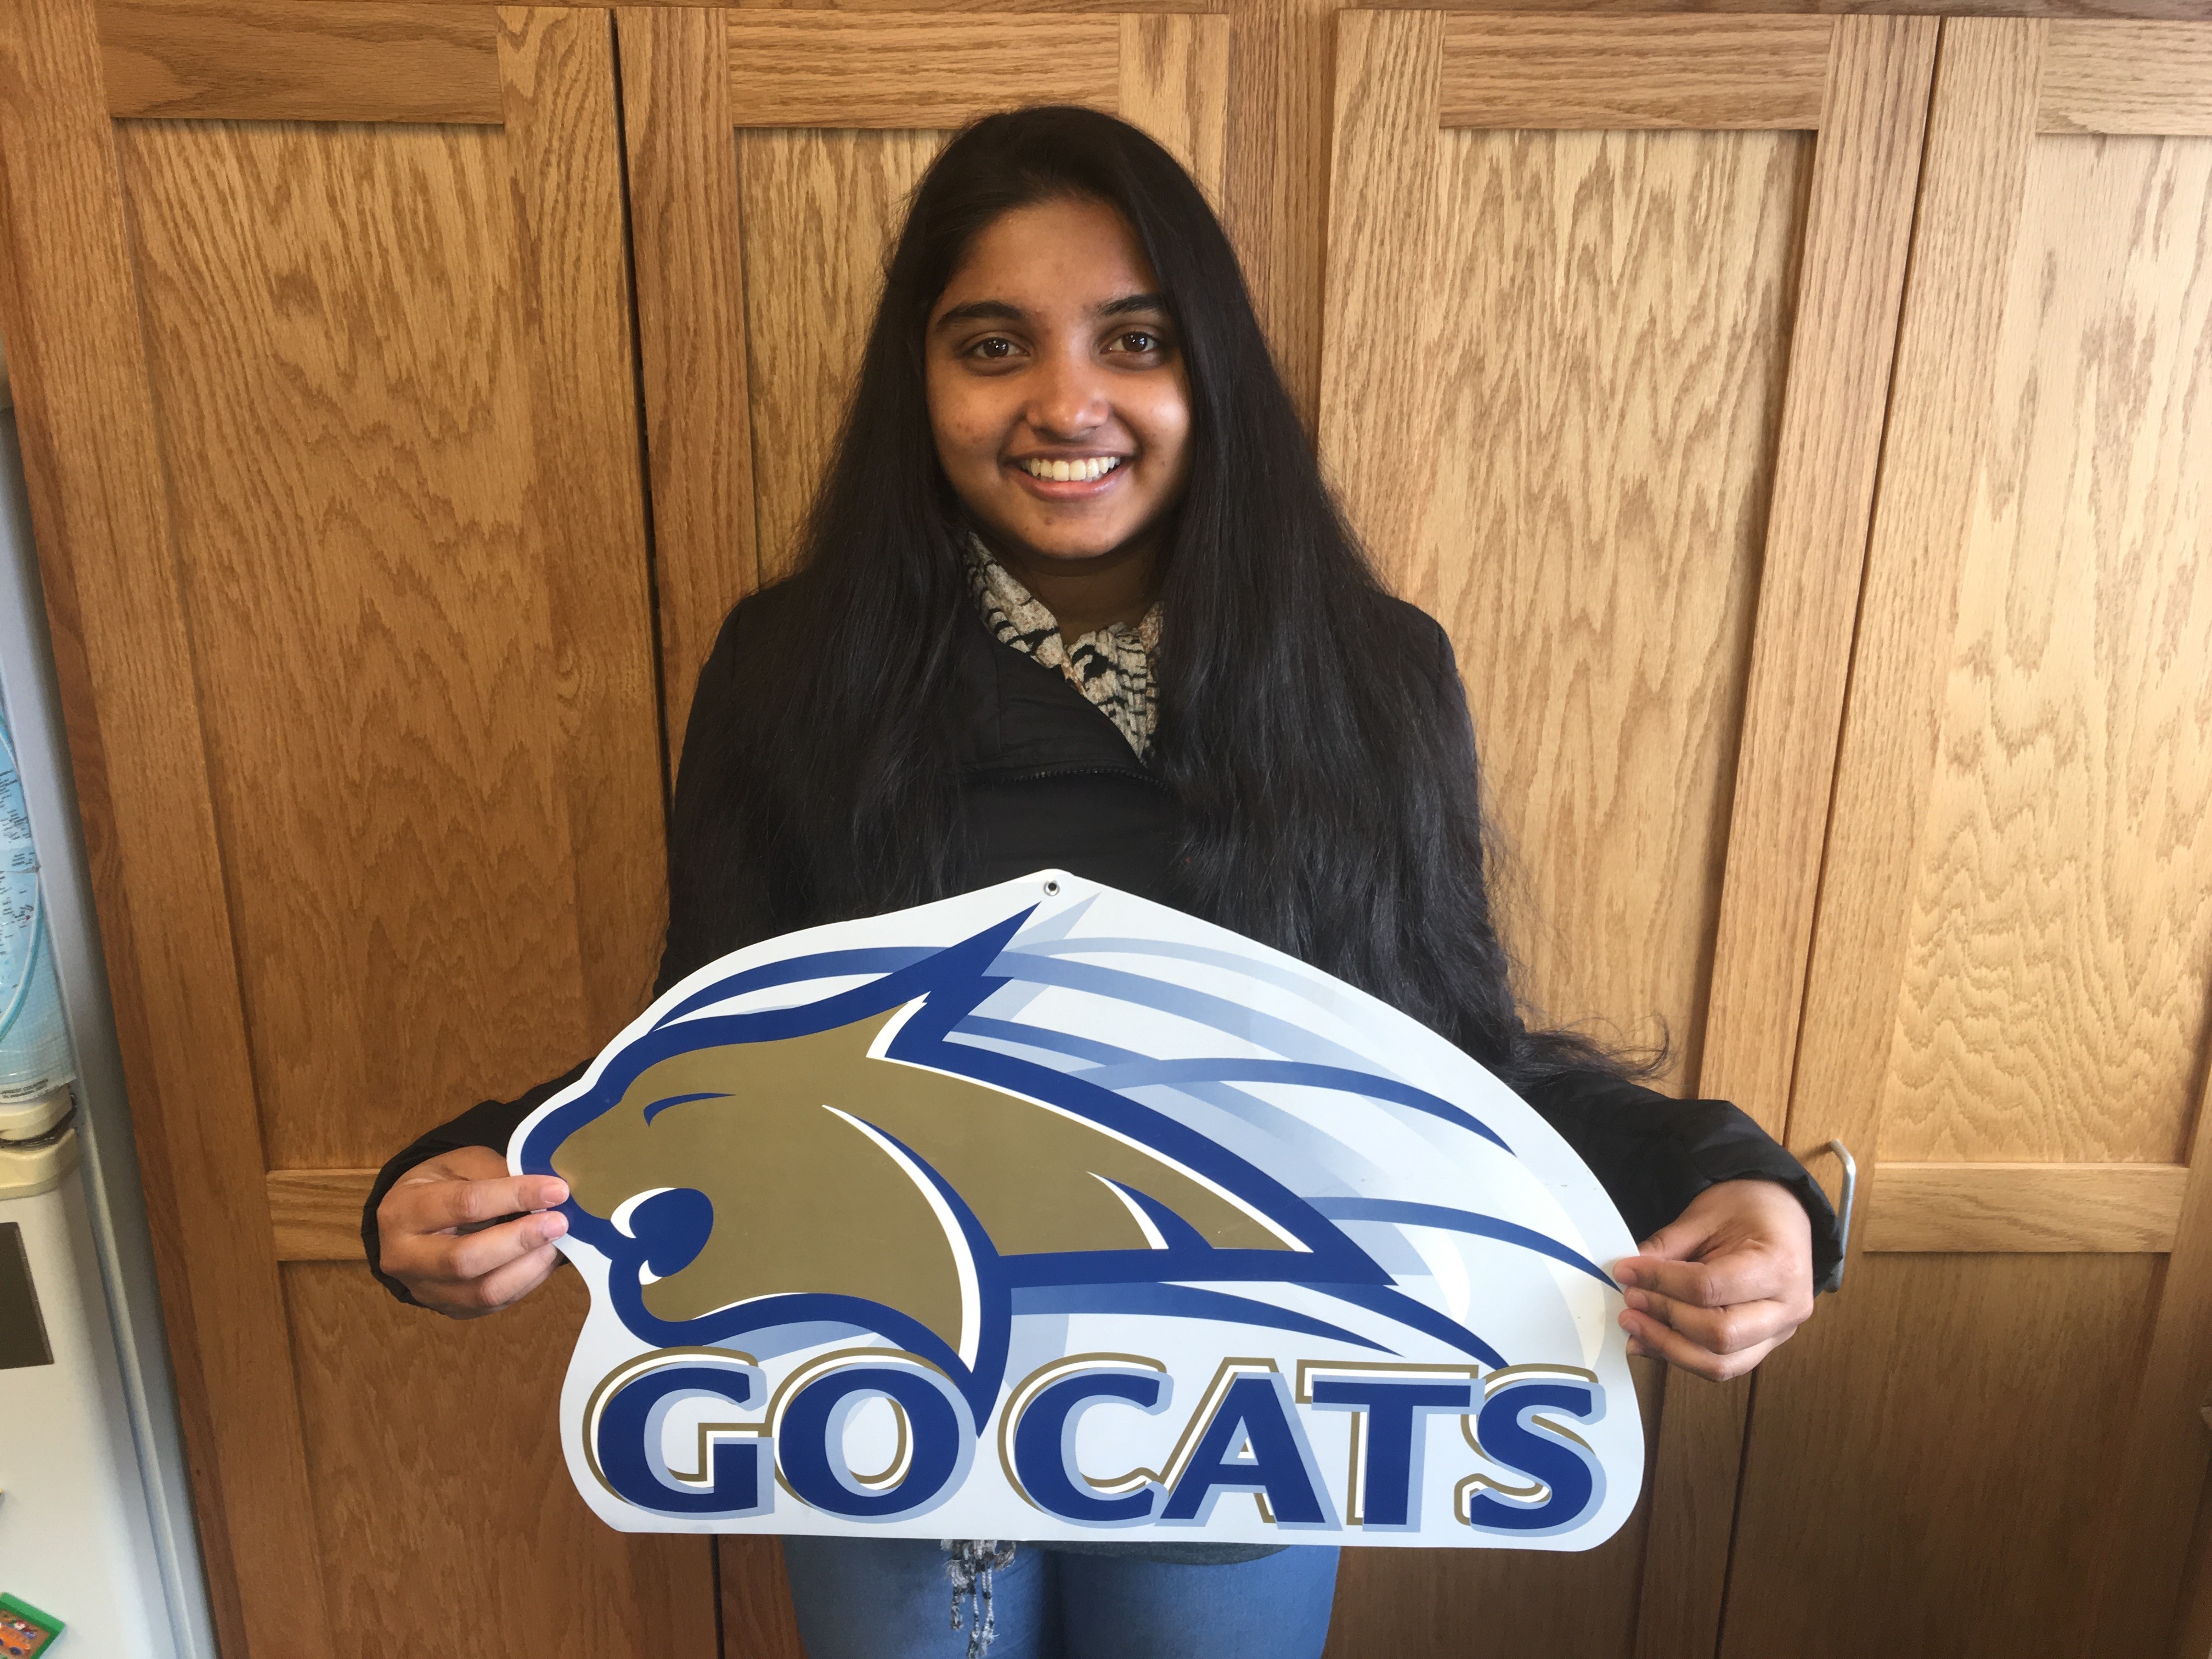 Student Ambika holding a sign that says "Go Cats" 